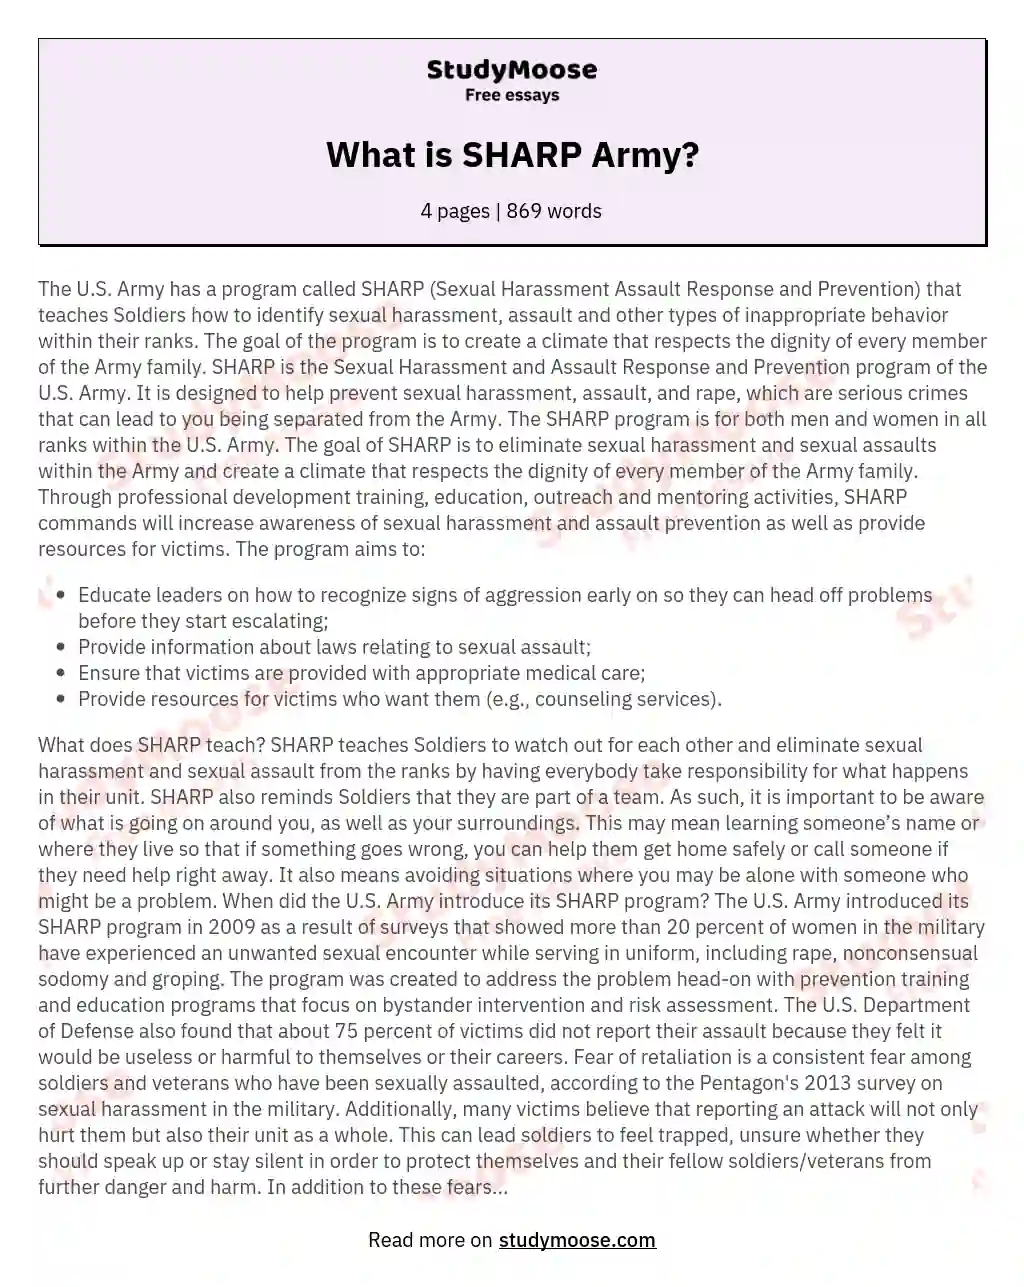 What is SHARP Army? essay